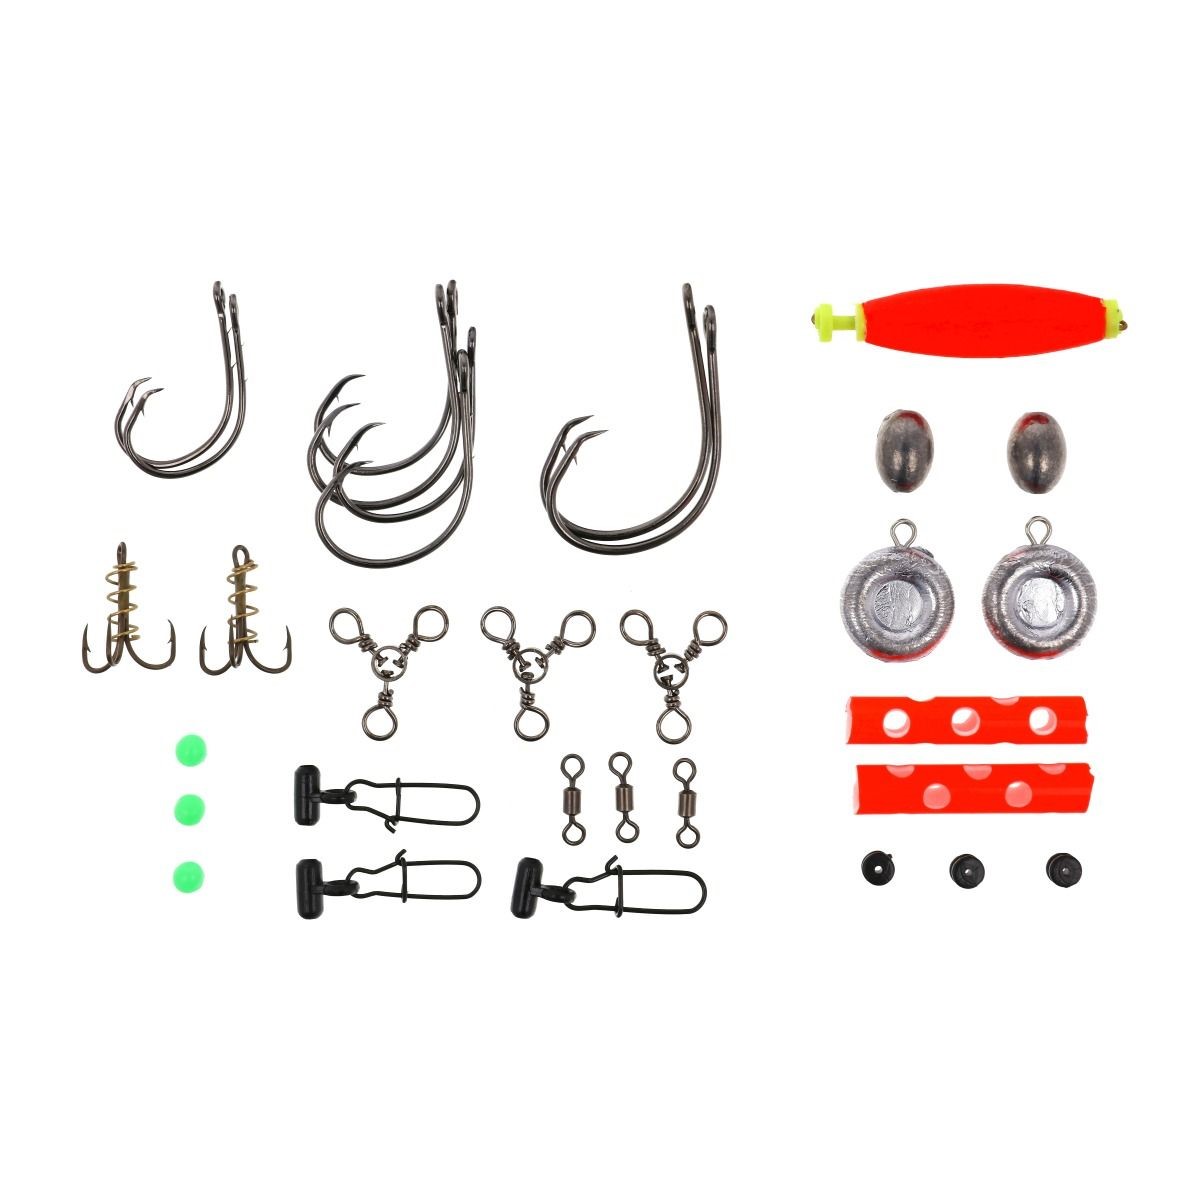 Eagle Claw Crappie/Bream Hook Assortment